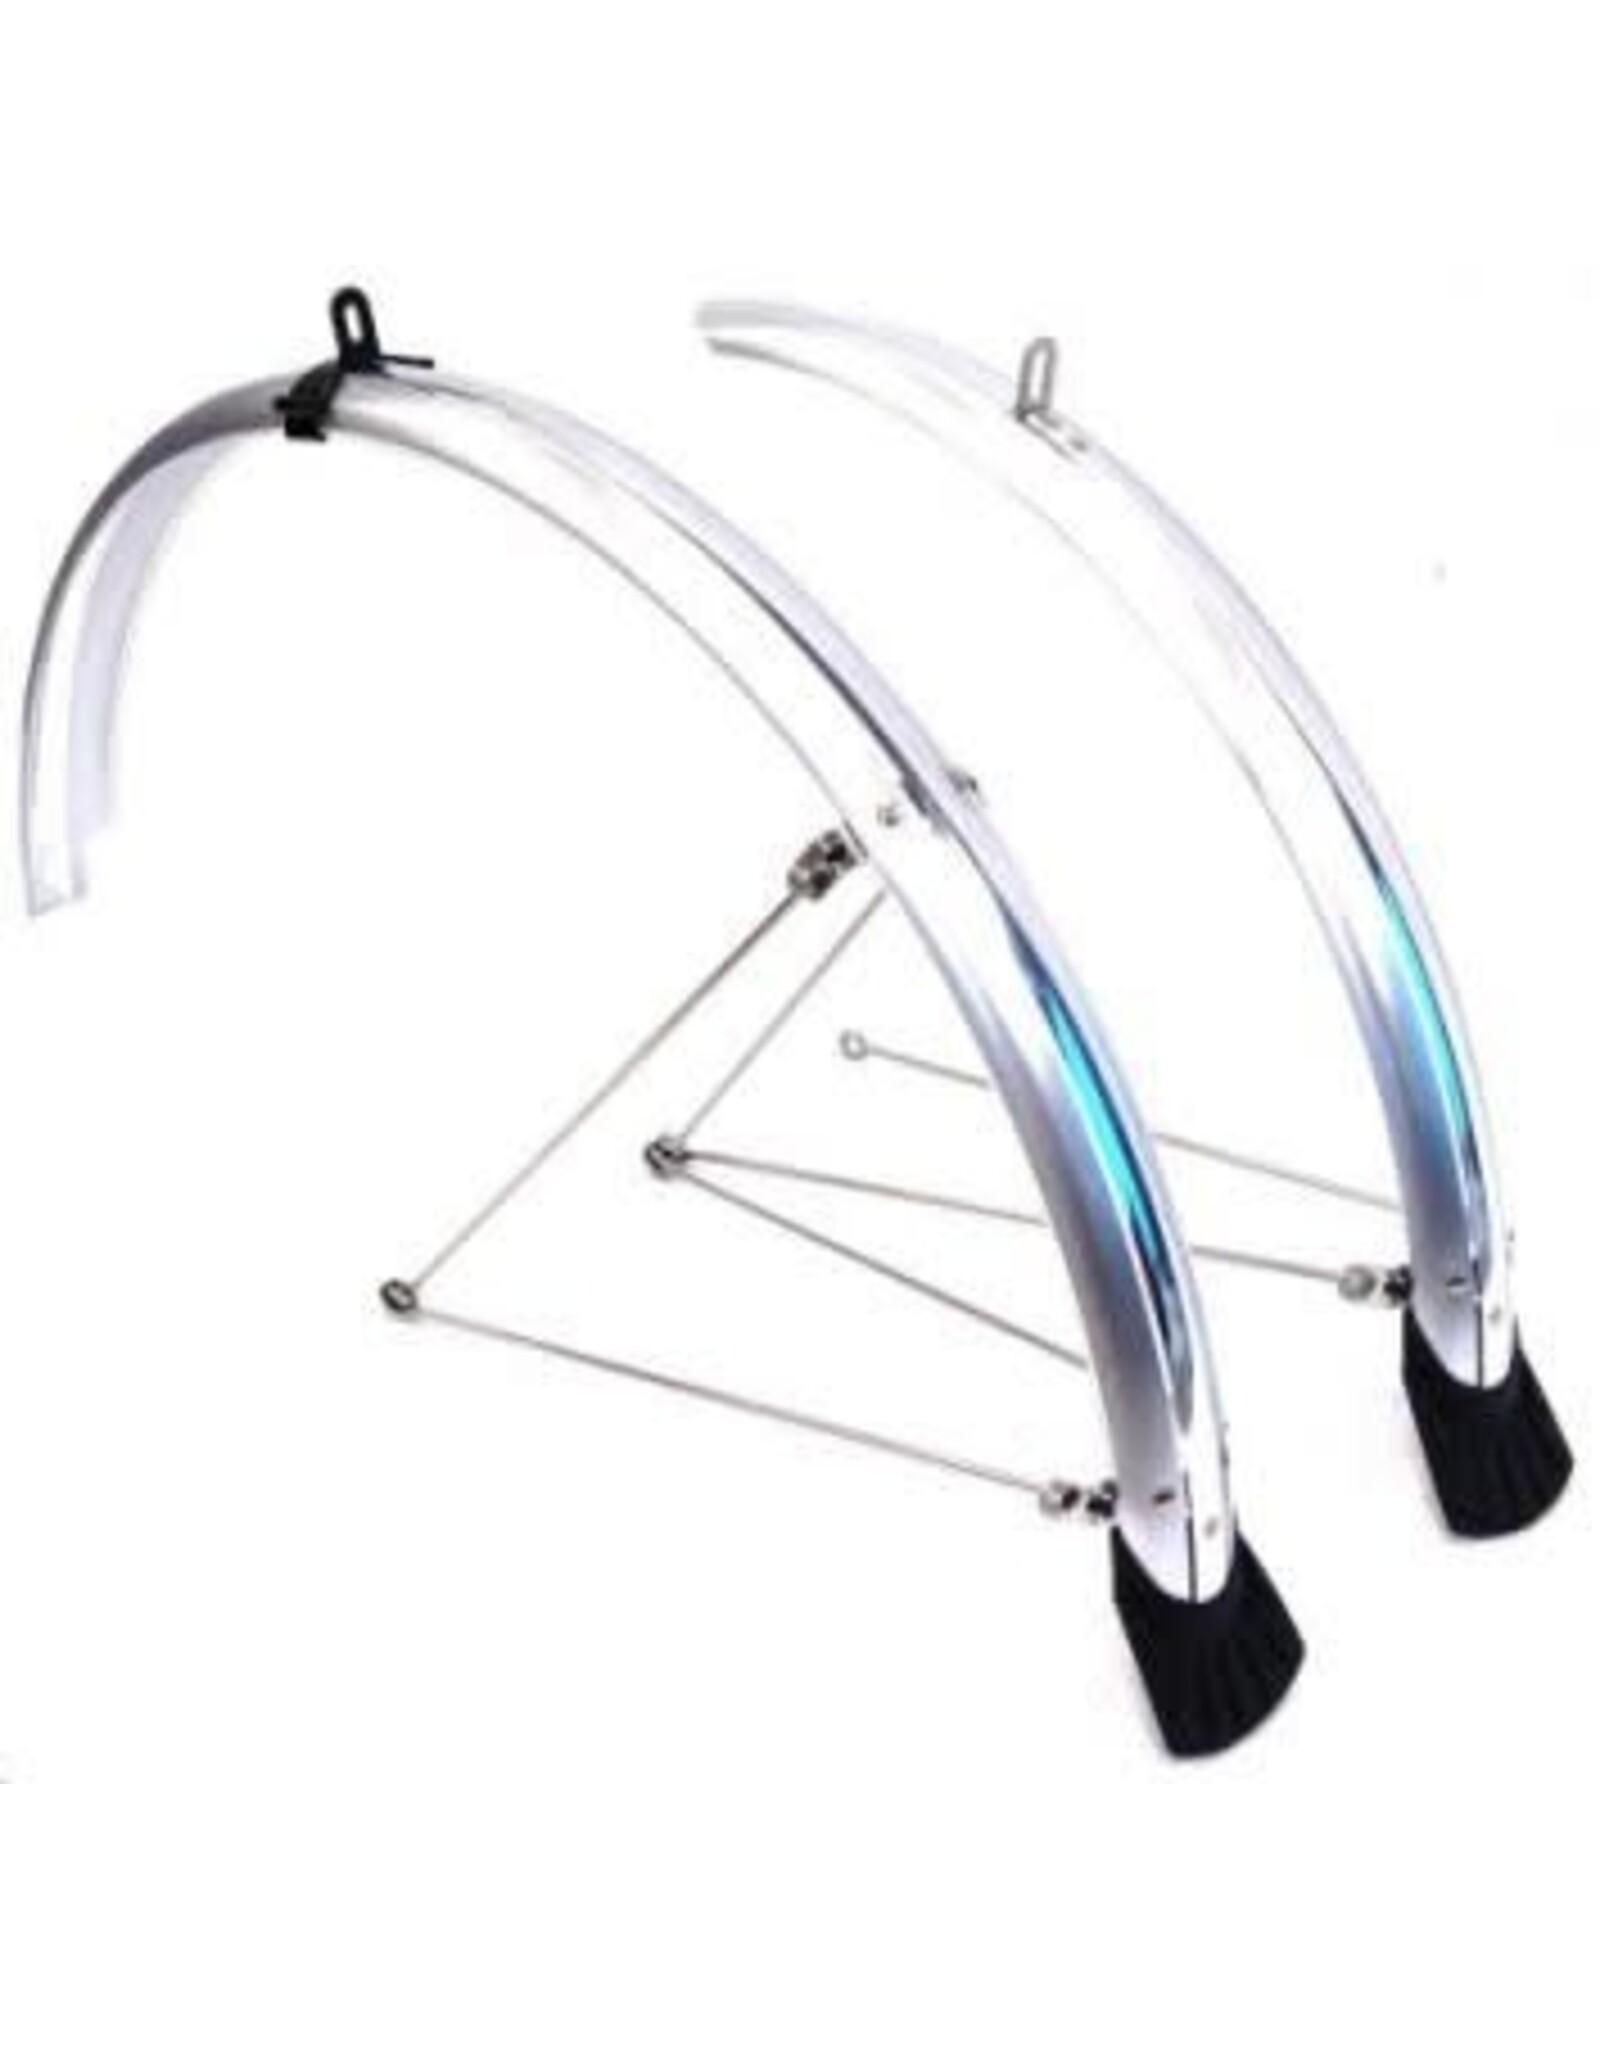 BIKELANE MUD GUARD SET 700c, FRONT & REAR INCLUDES STAYS METAL FITTINGS SILVER (44mm Wide)